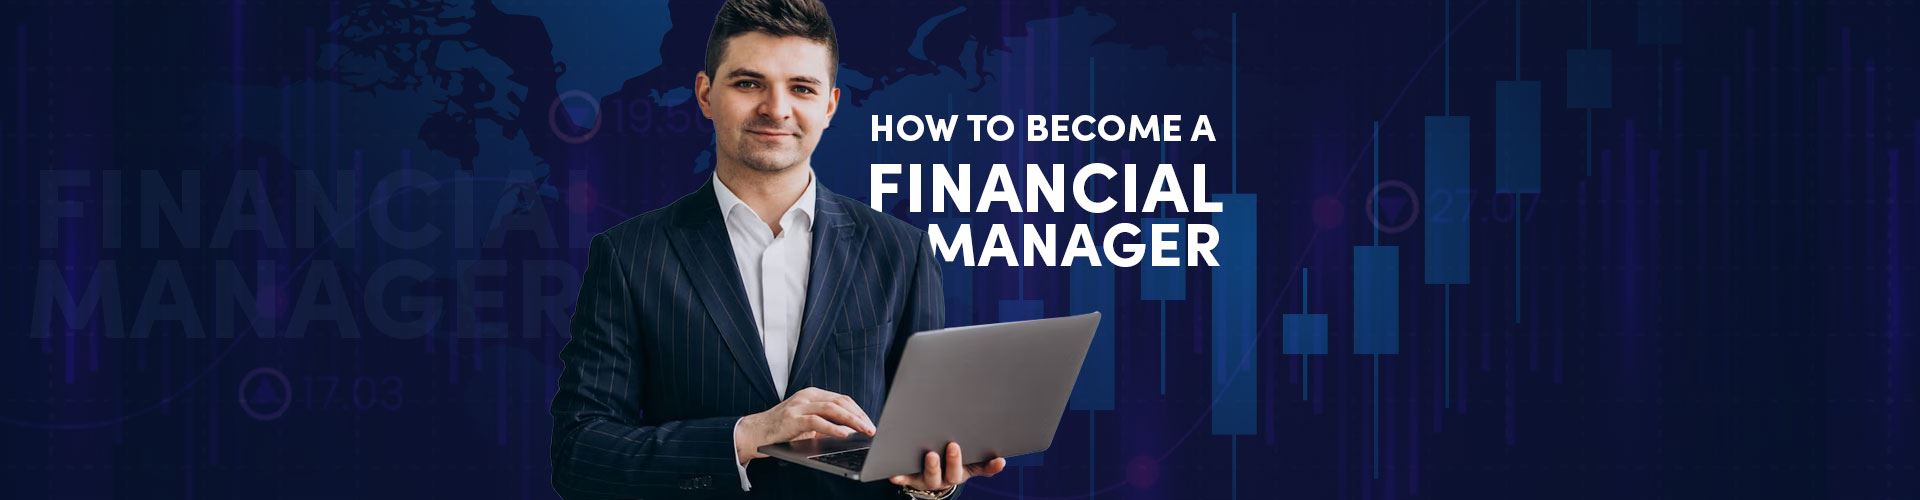 How to Become a Financial Manager